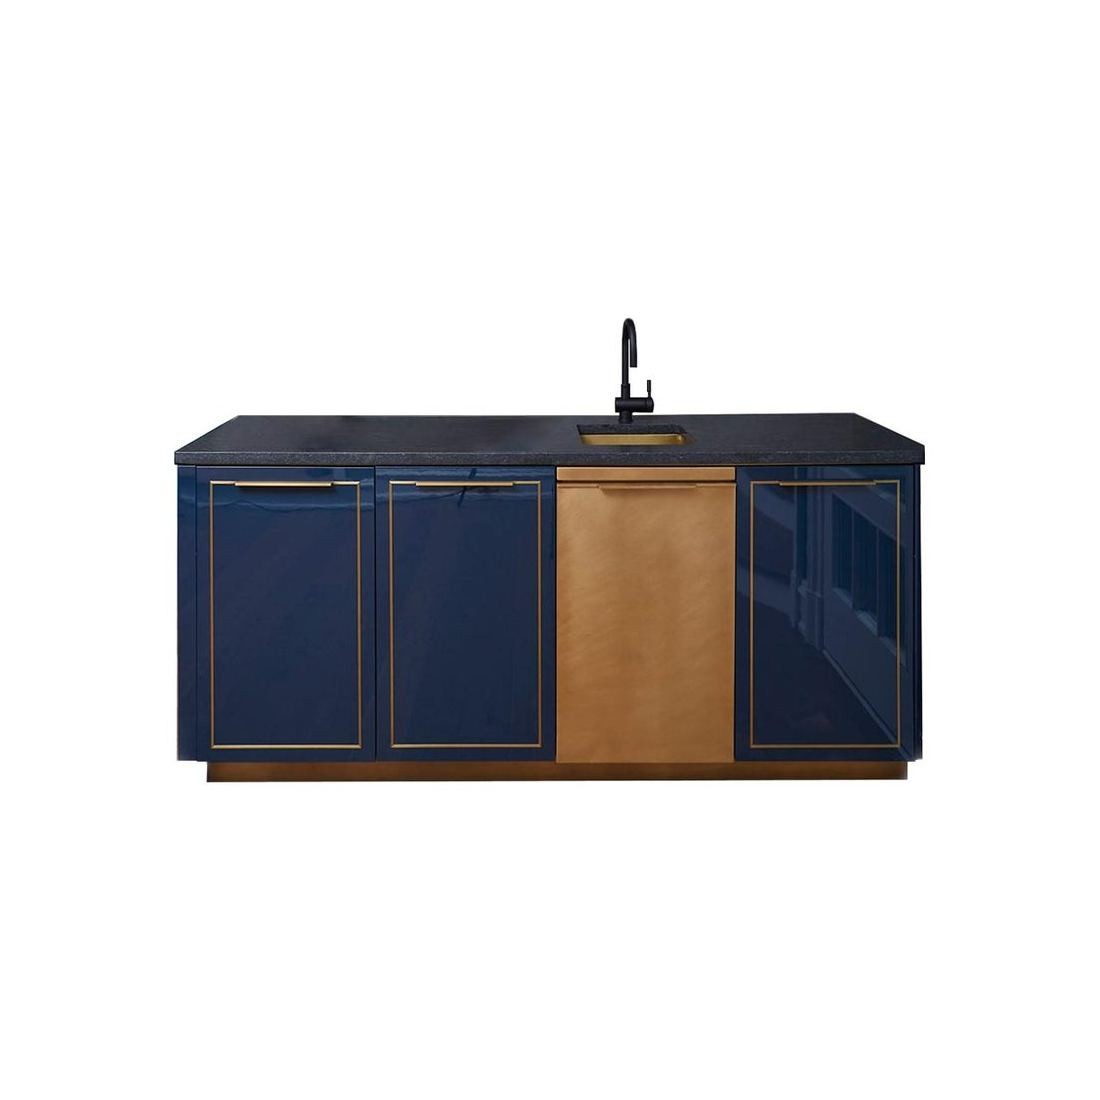 РљСѓС…РЅСЏ Amuneal's Gloss Lacquer Bar with Integral Brass Sink